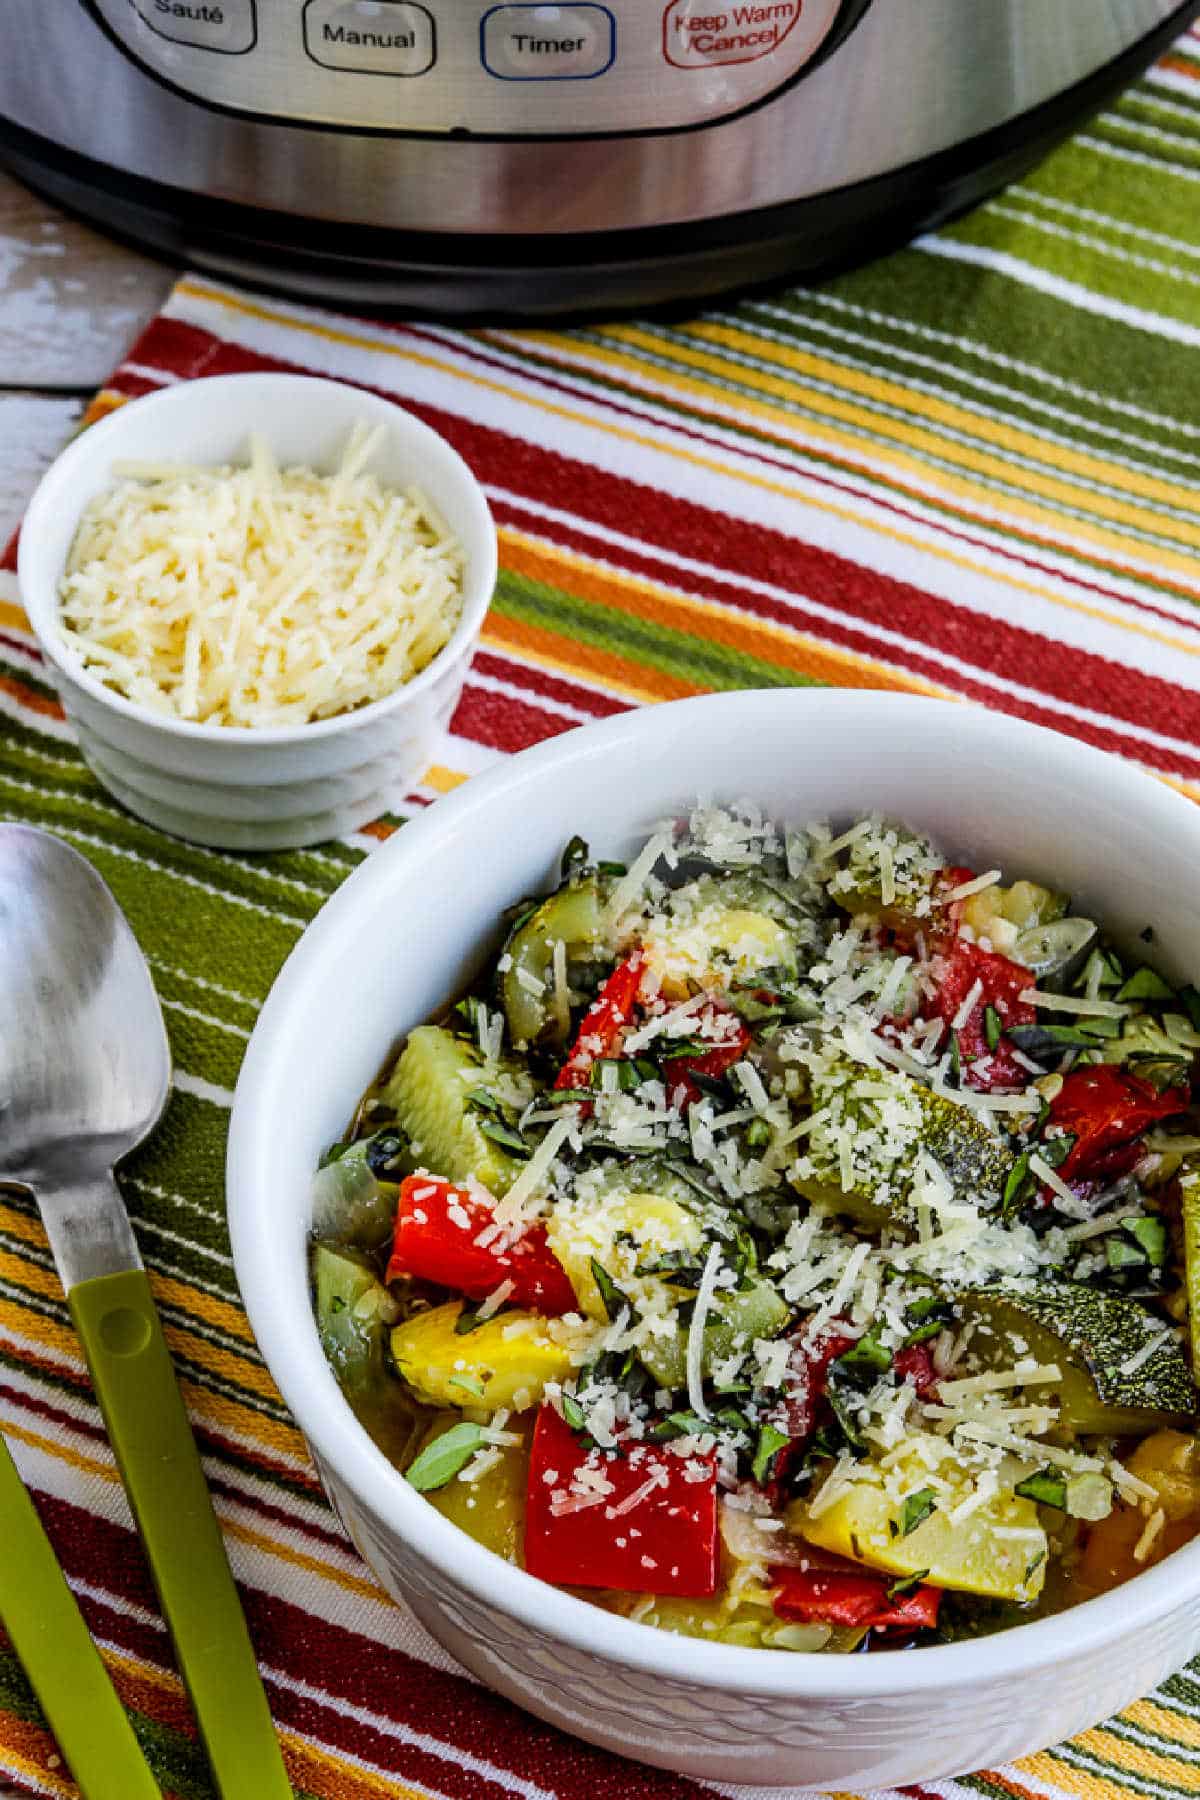 Instant Pot Ratatouille shown on serving bowl with Instant Pot in background